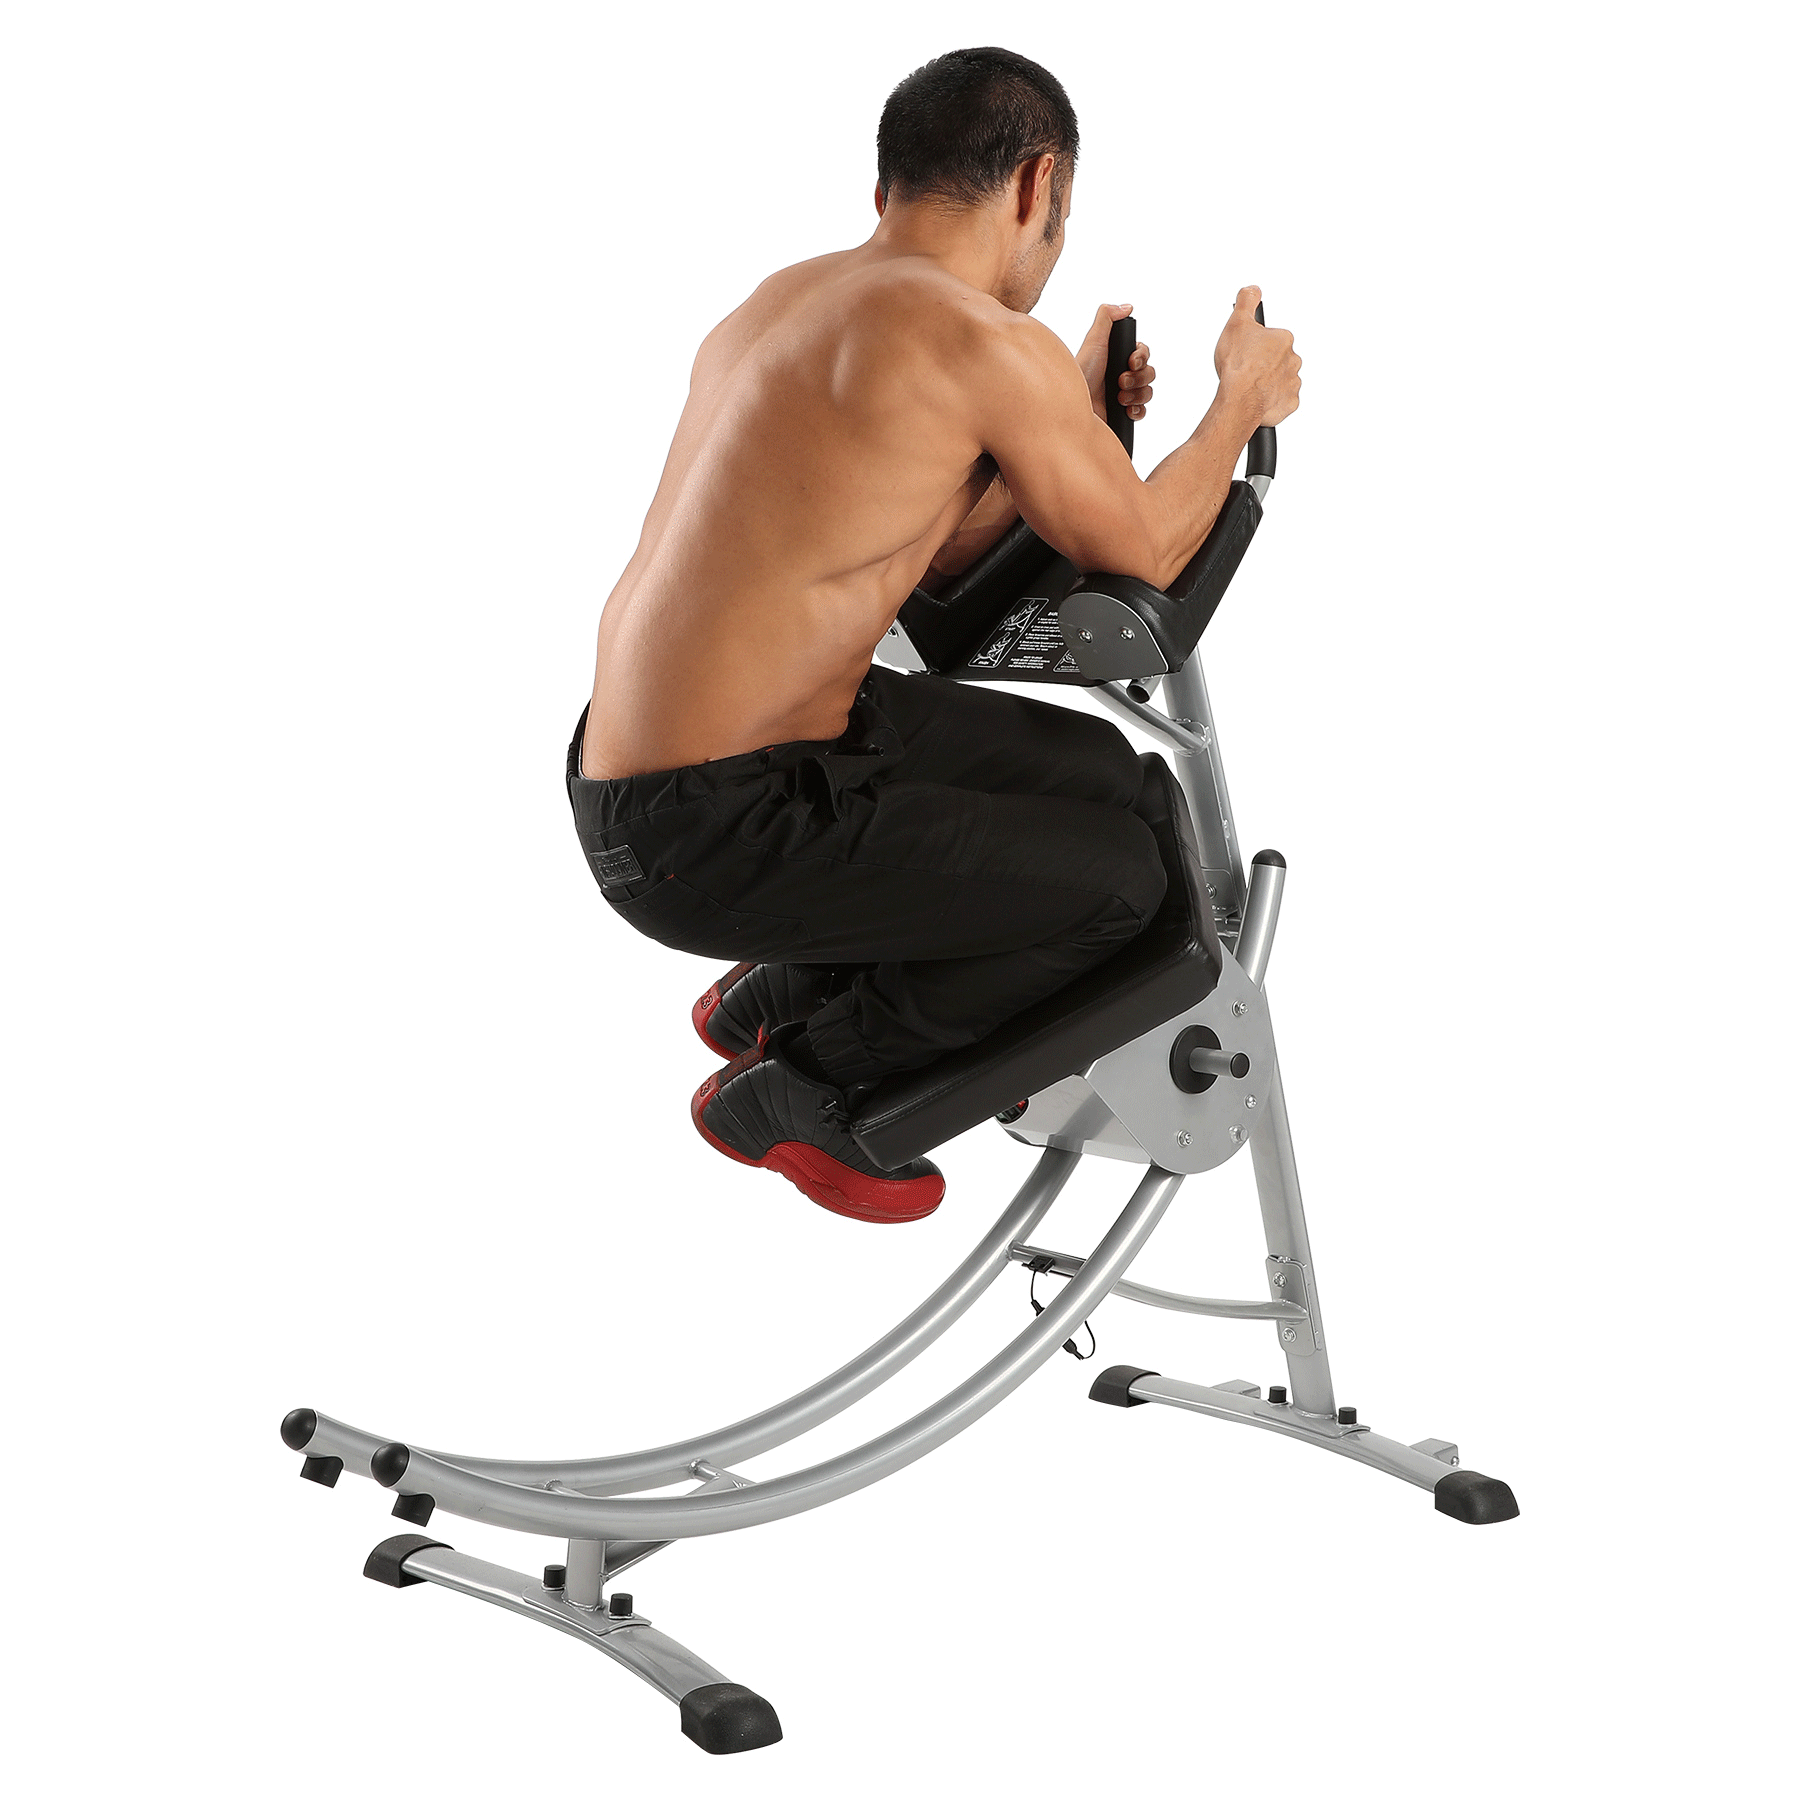 AB Coaster Abdominal Fitness Exercise Machine Body Muscle Core Workout